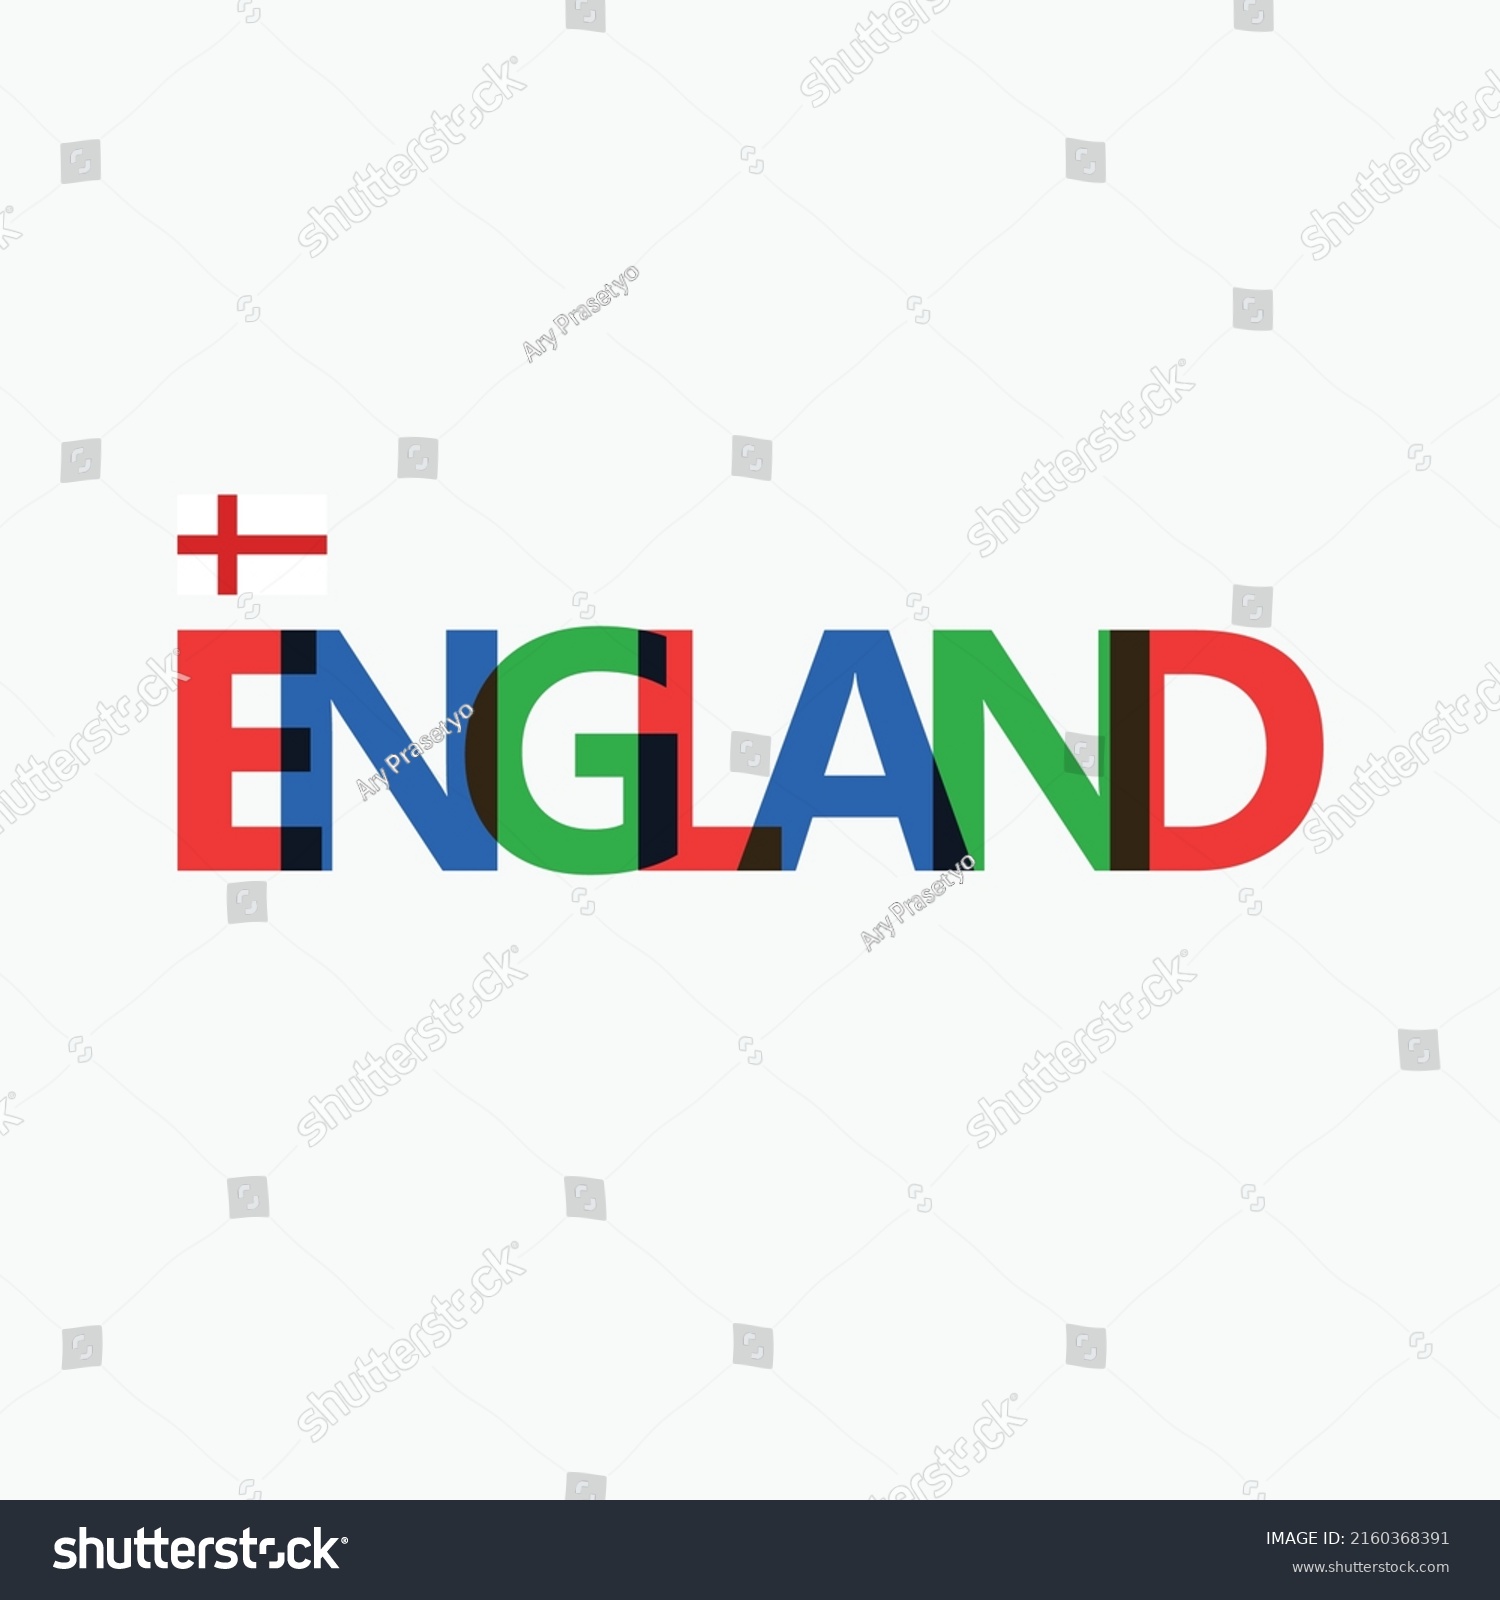 England Rgb Colorful Typography National Flag Stock Vector (Royalty ...